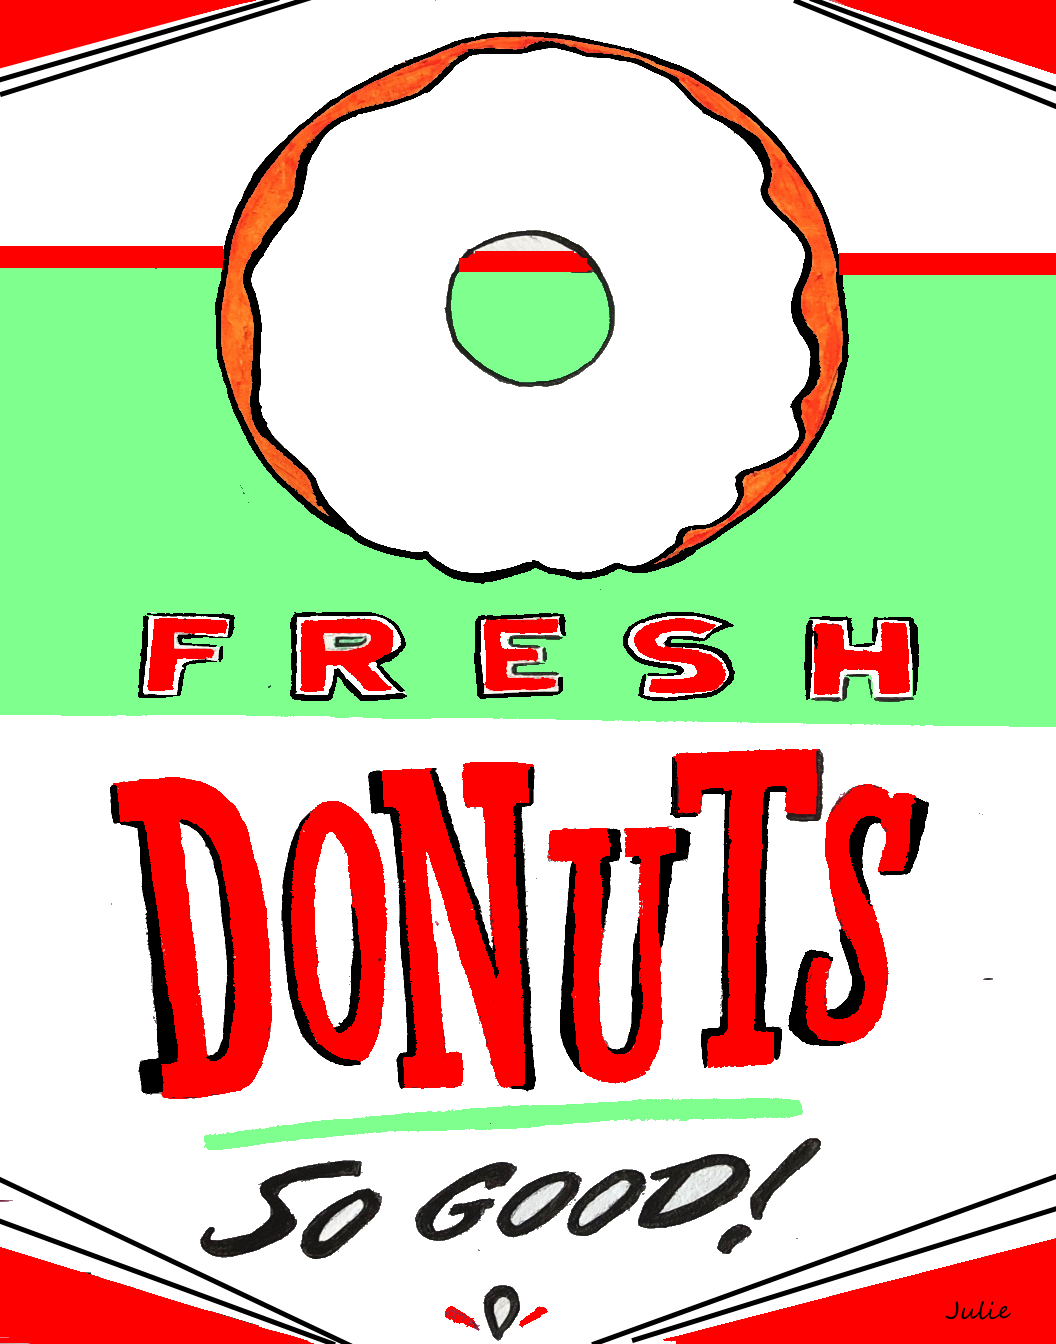 Retro Donuts Mouse Pad